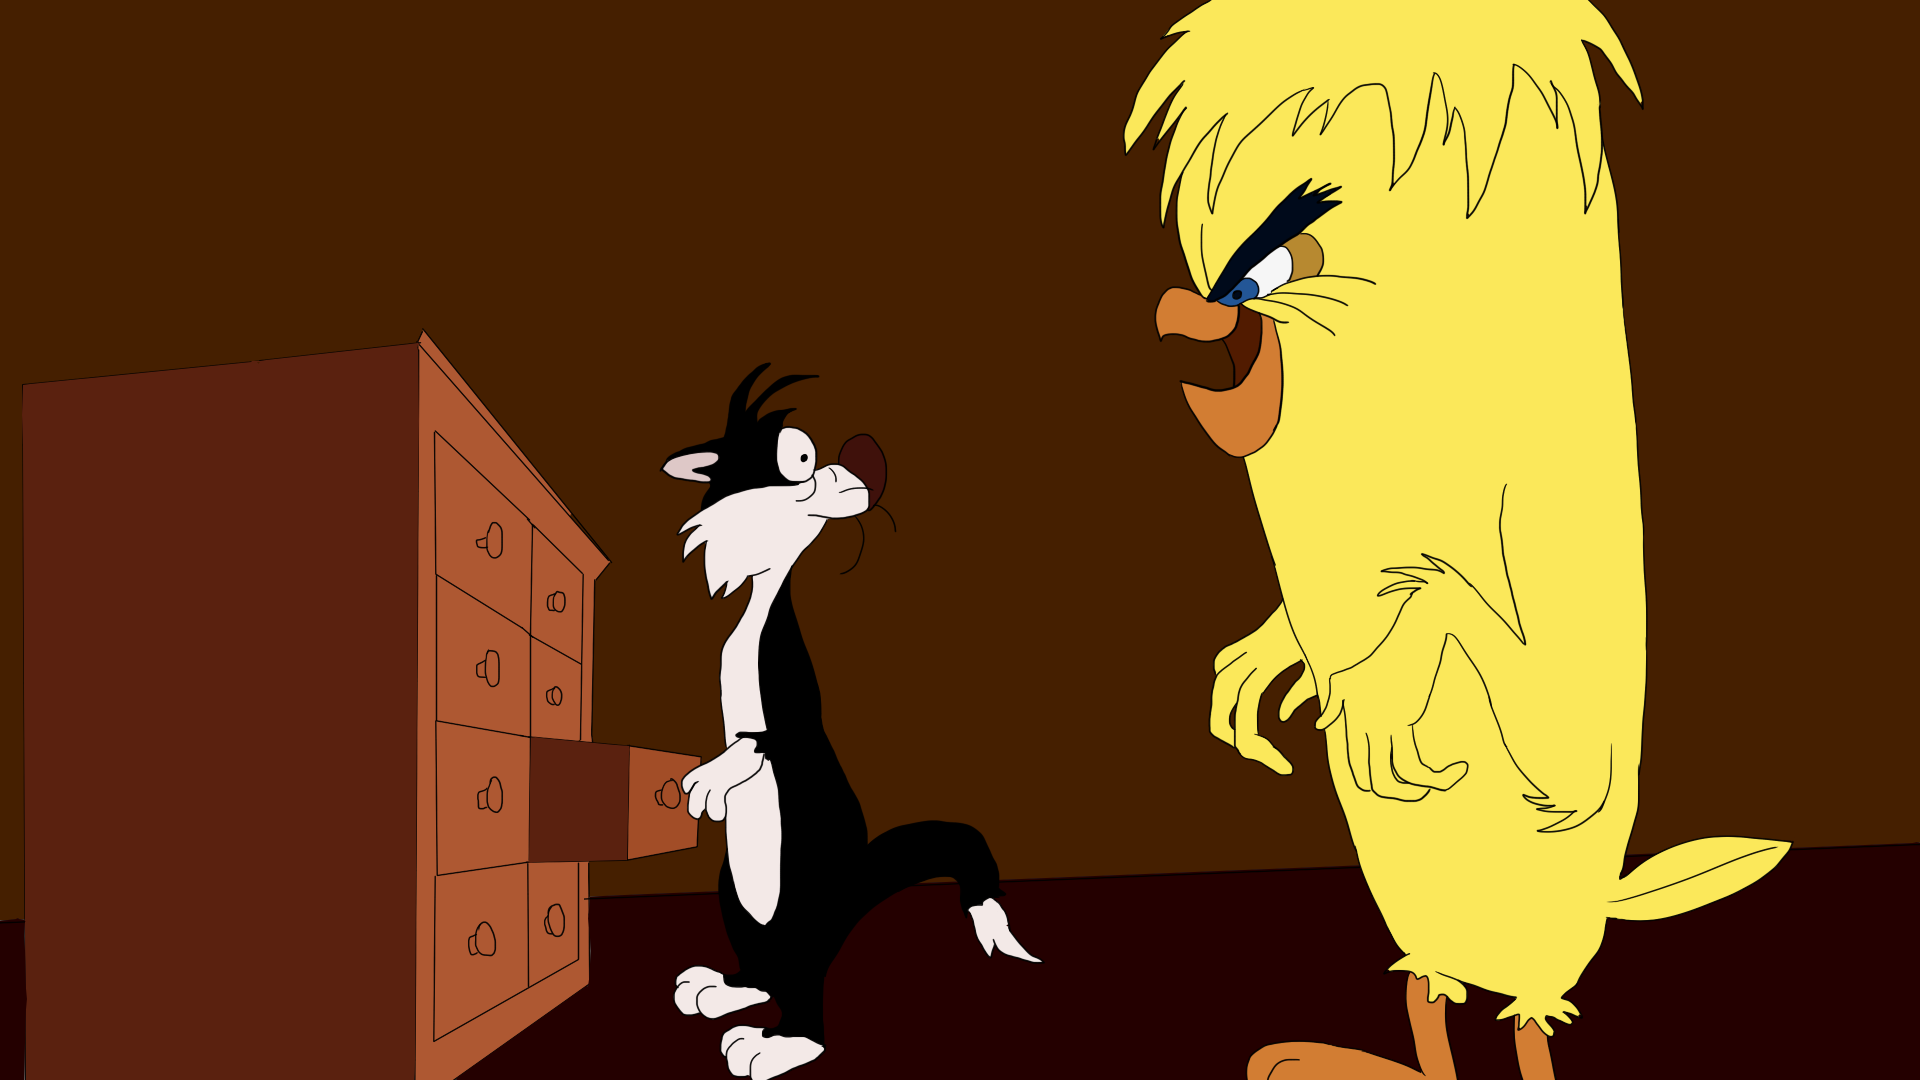 Tweety Hyde from the Looney Tunes short Hyde and Go Tweet.

Traced and colored in Paint Tool SAI.
